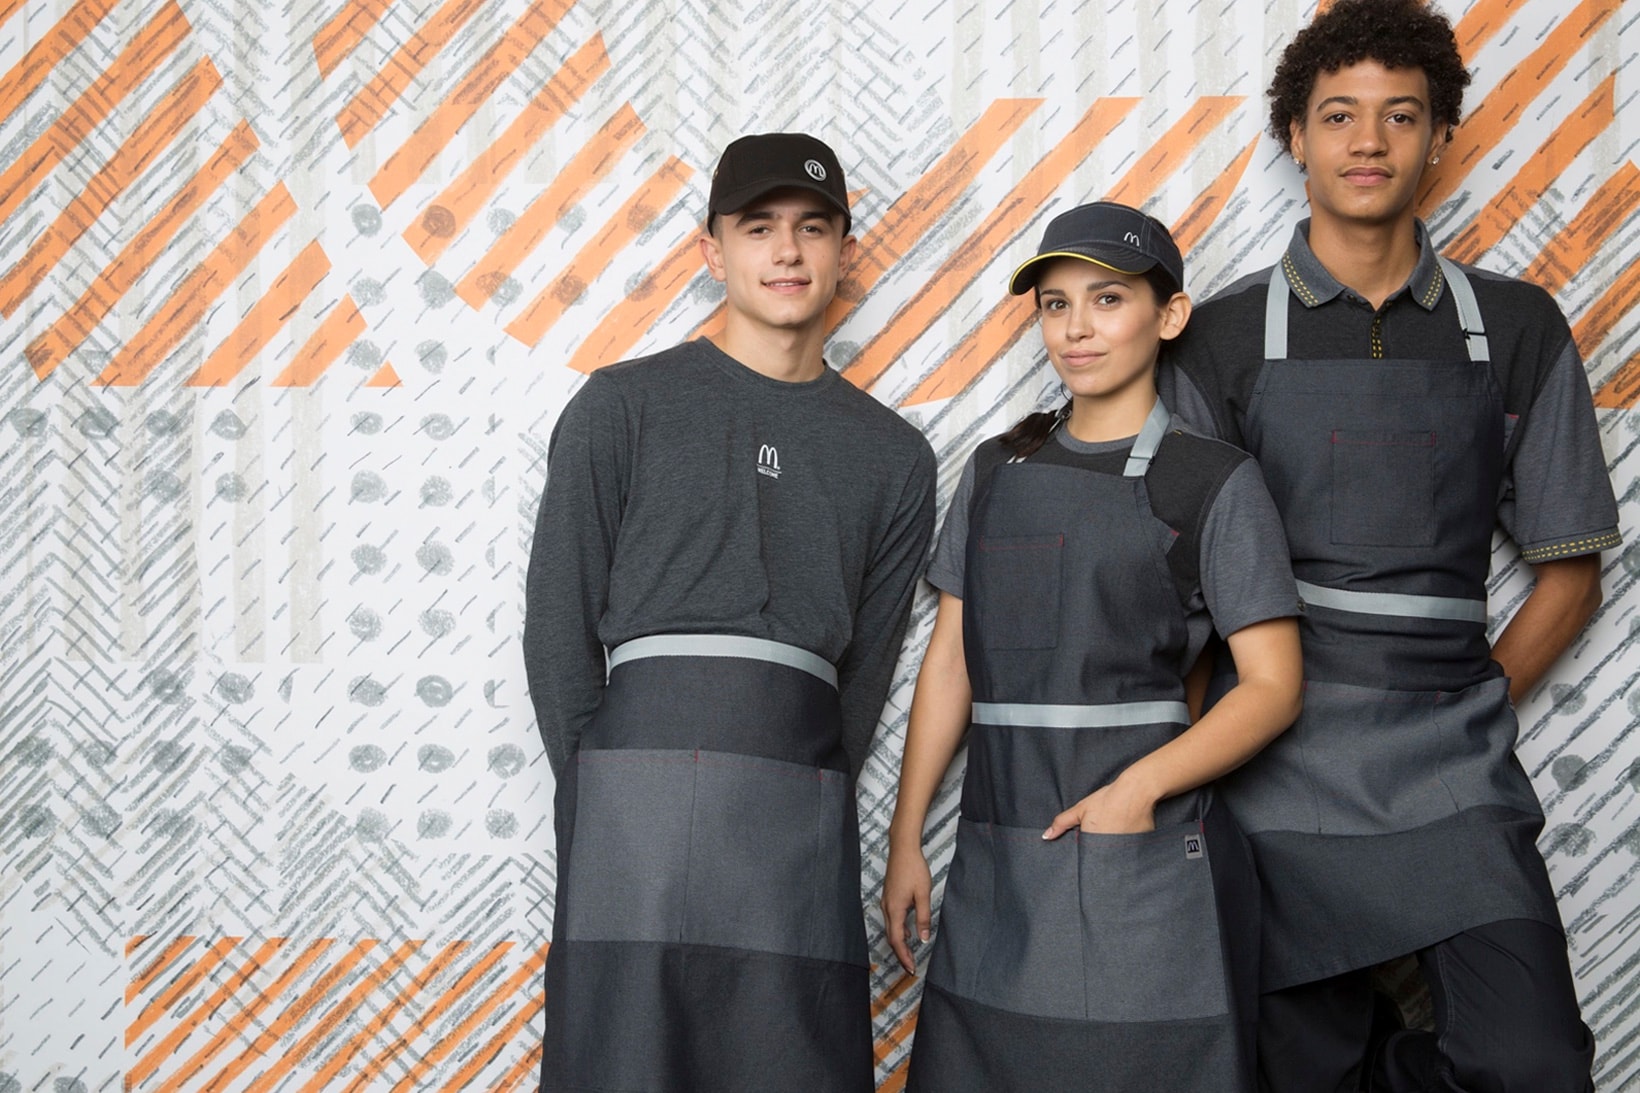 McDonald's Debuts New Uniforms by Waraire Boswell